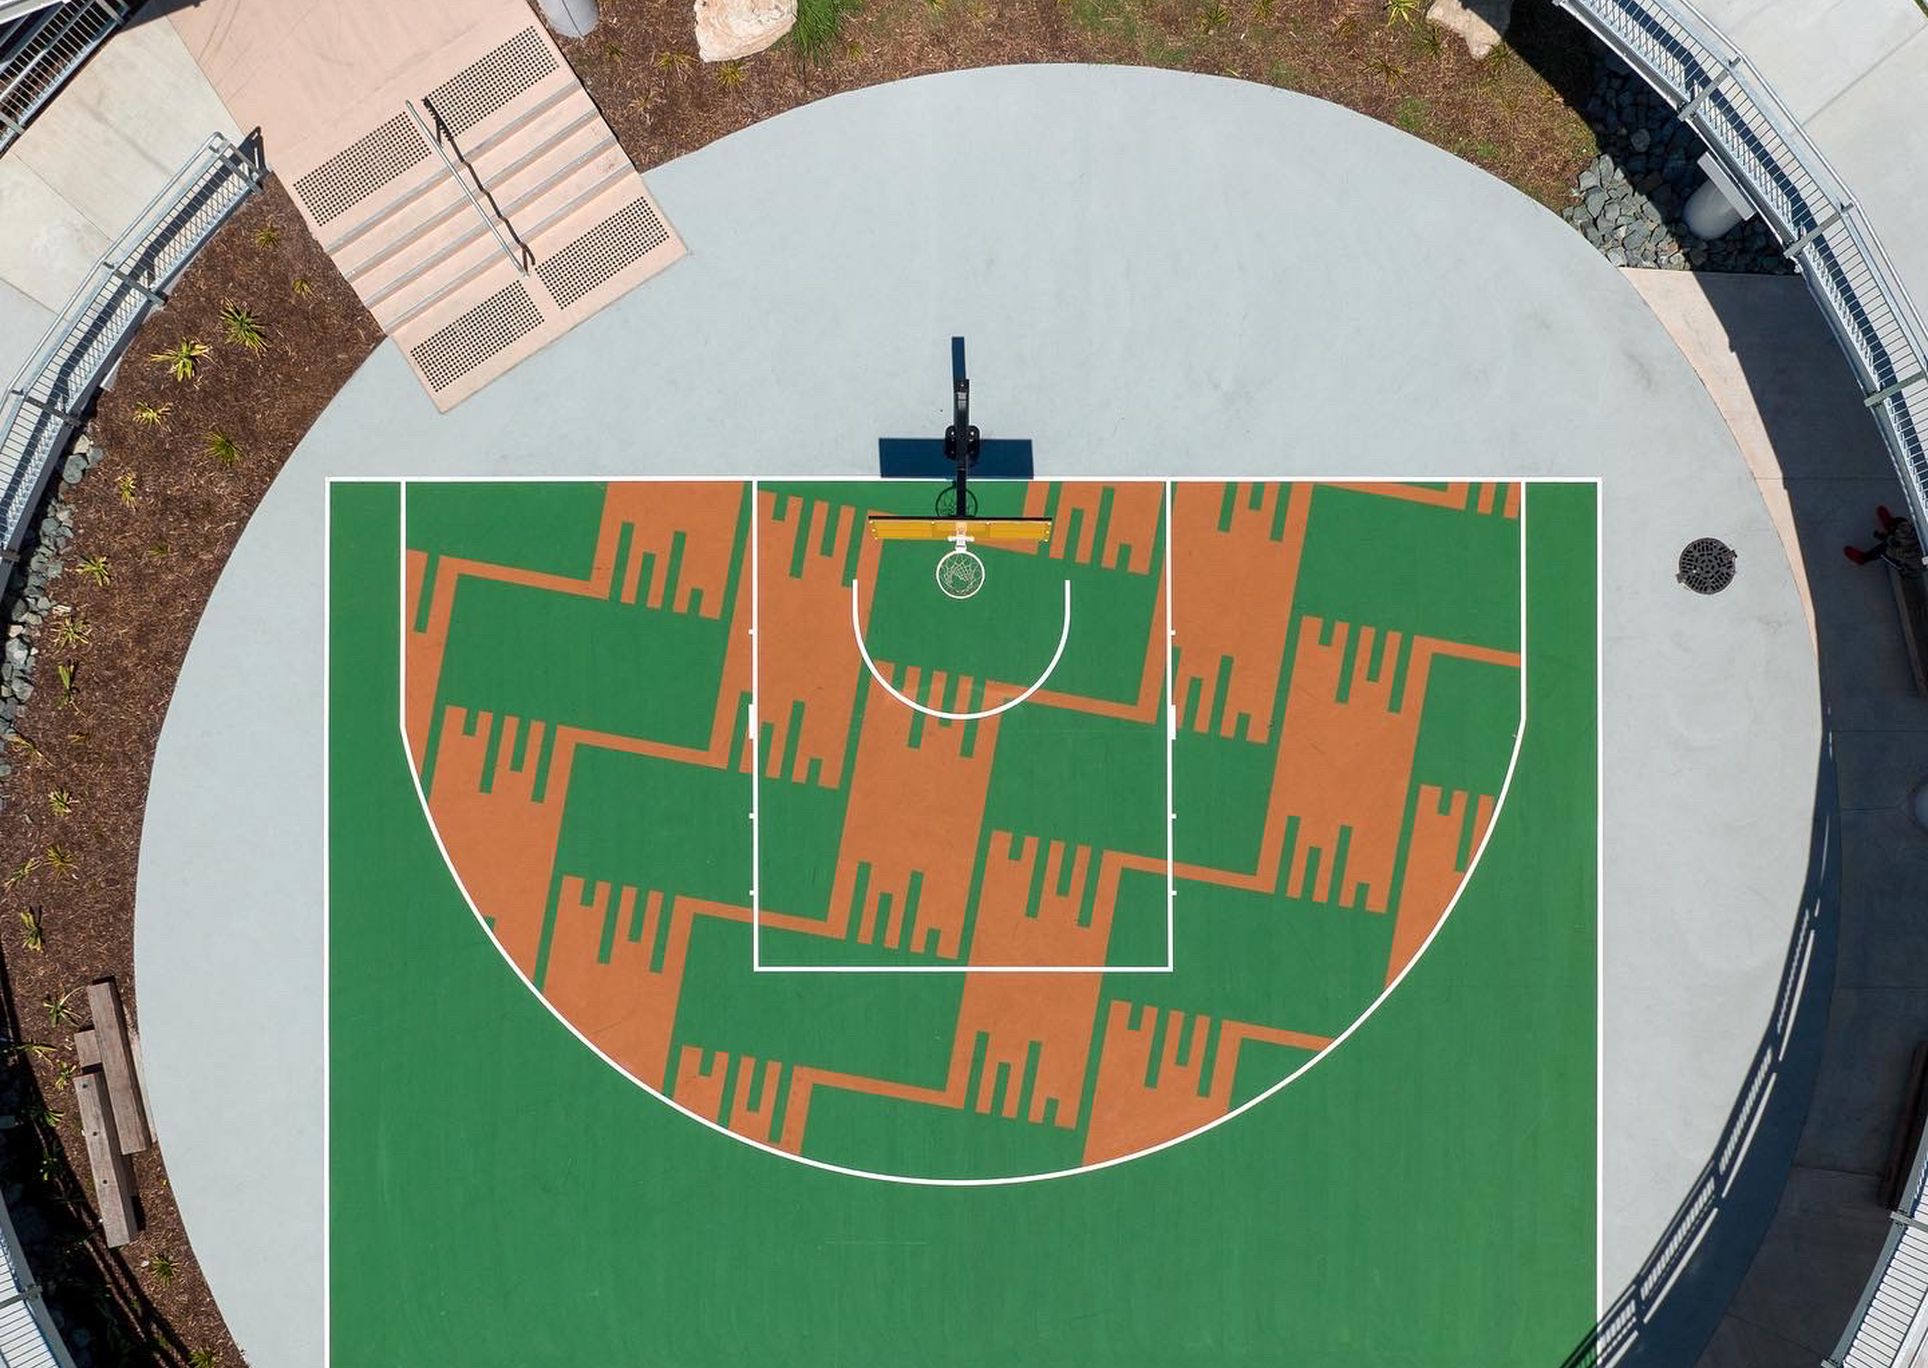 New Bright Art Court Design by Dr Suits